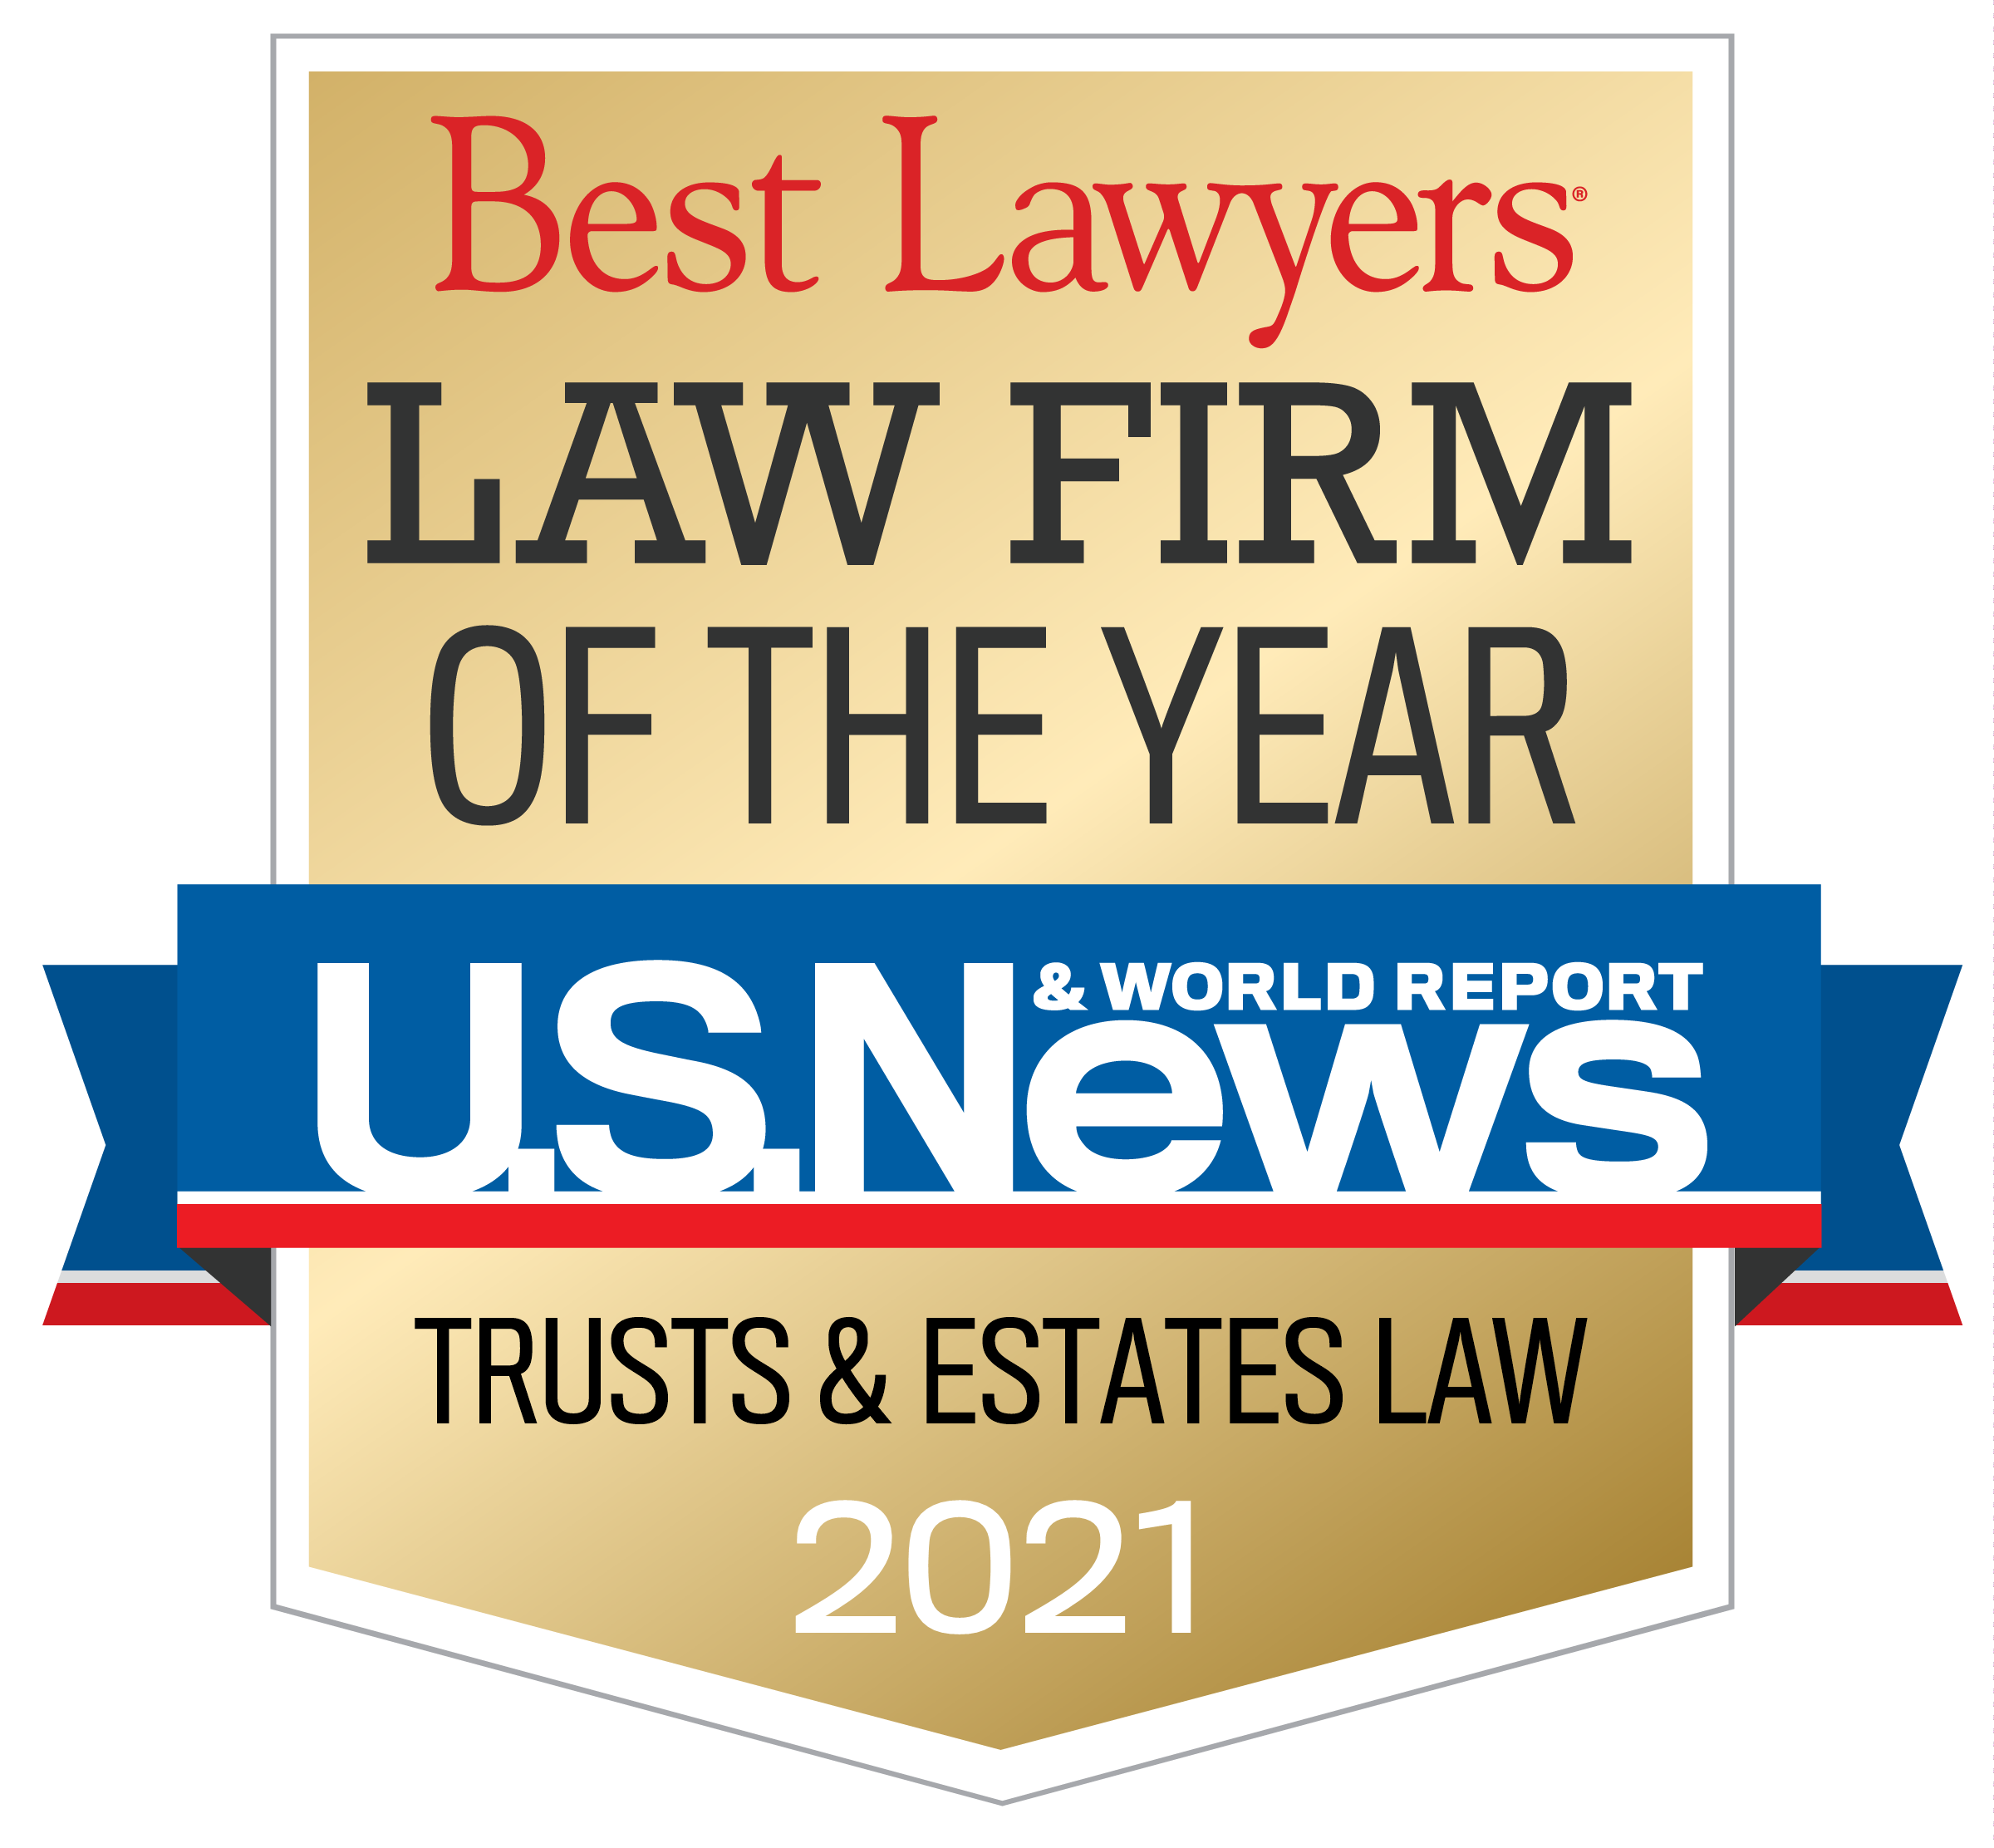 Best Lawyers - Law Firm of the Year - US News - 2021